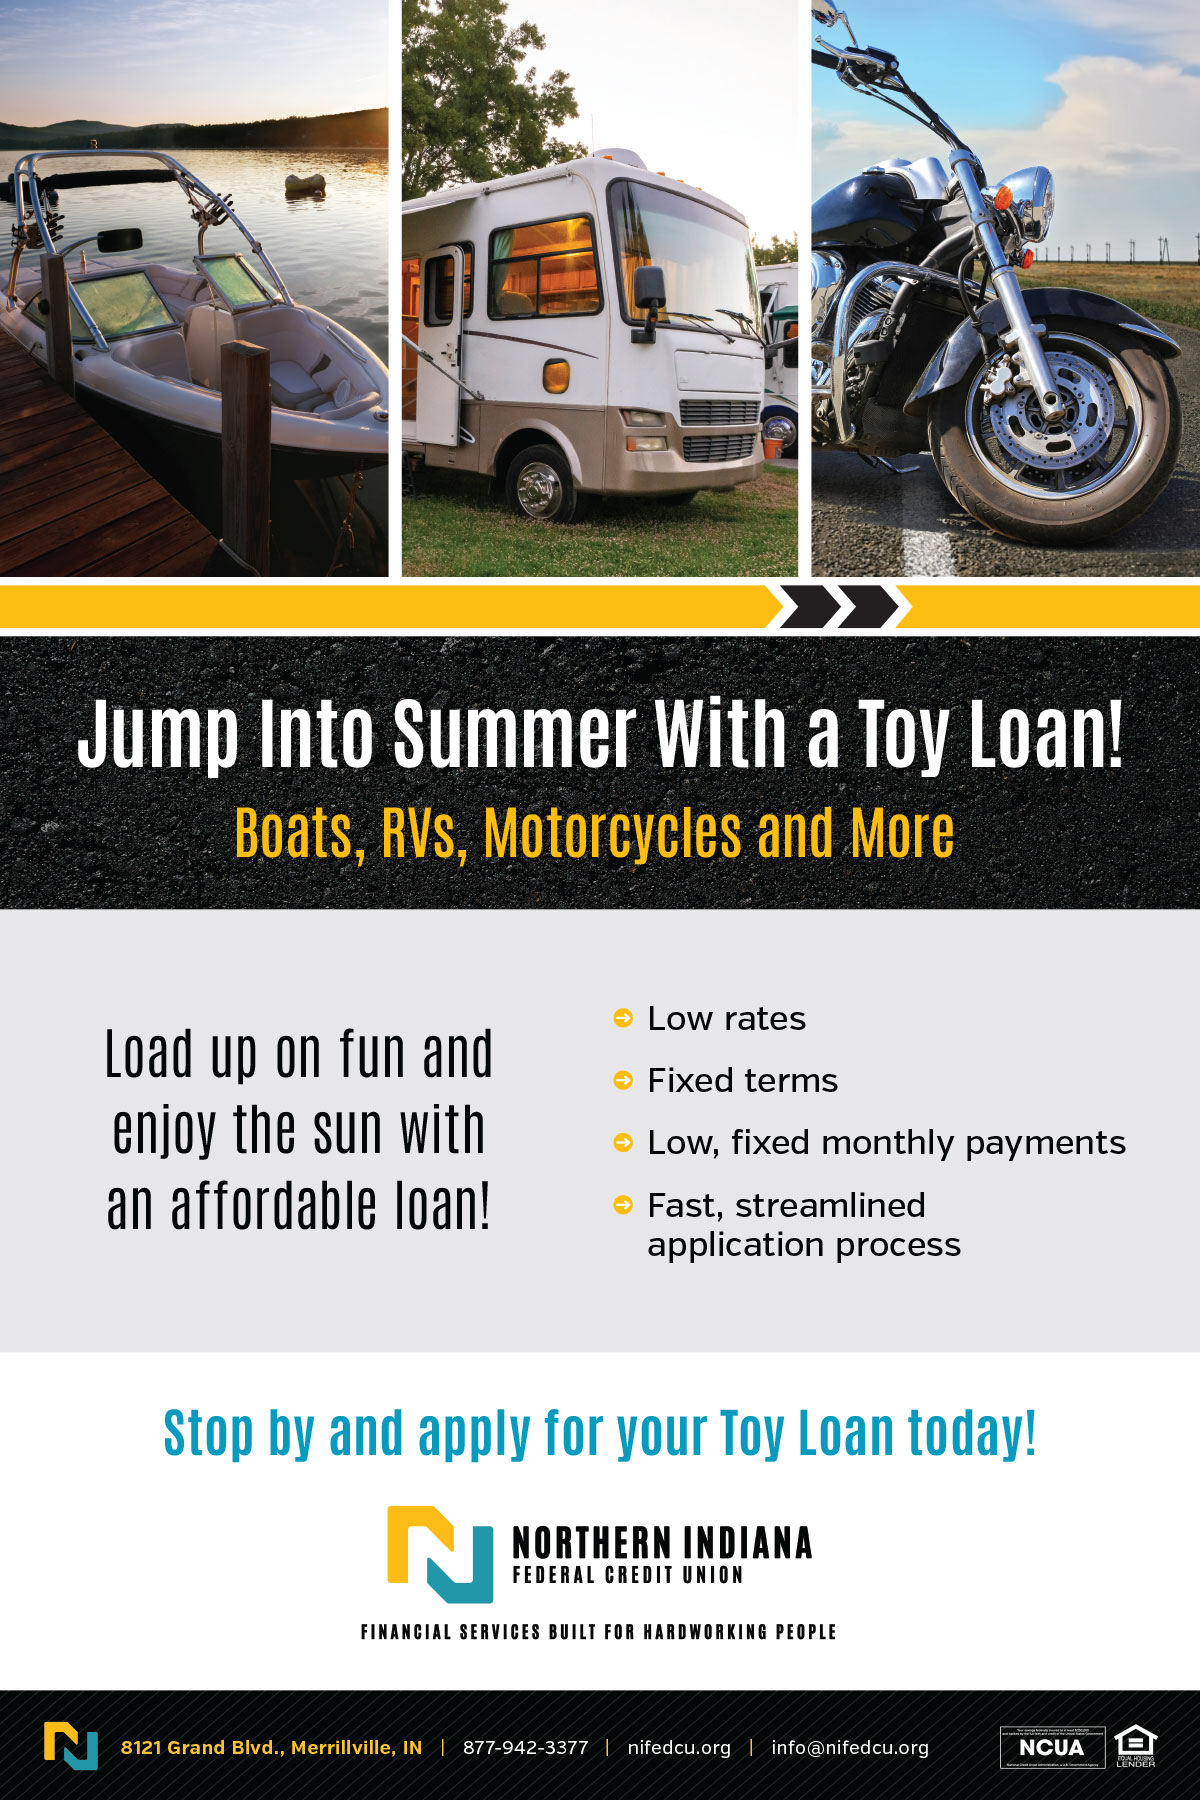 Jump into summer with a toy loan! Low rates. Fixed terms. Low, fixed monthly monthly payments. Fast, streamlined application process.